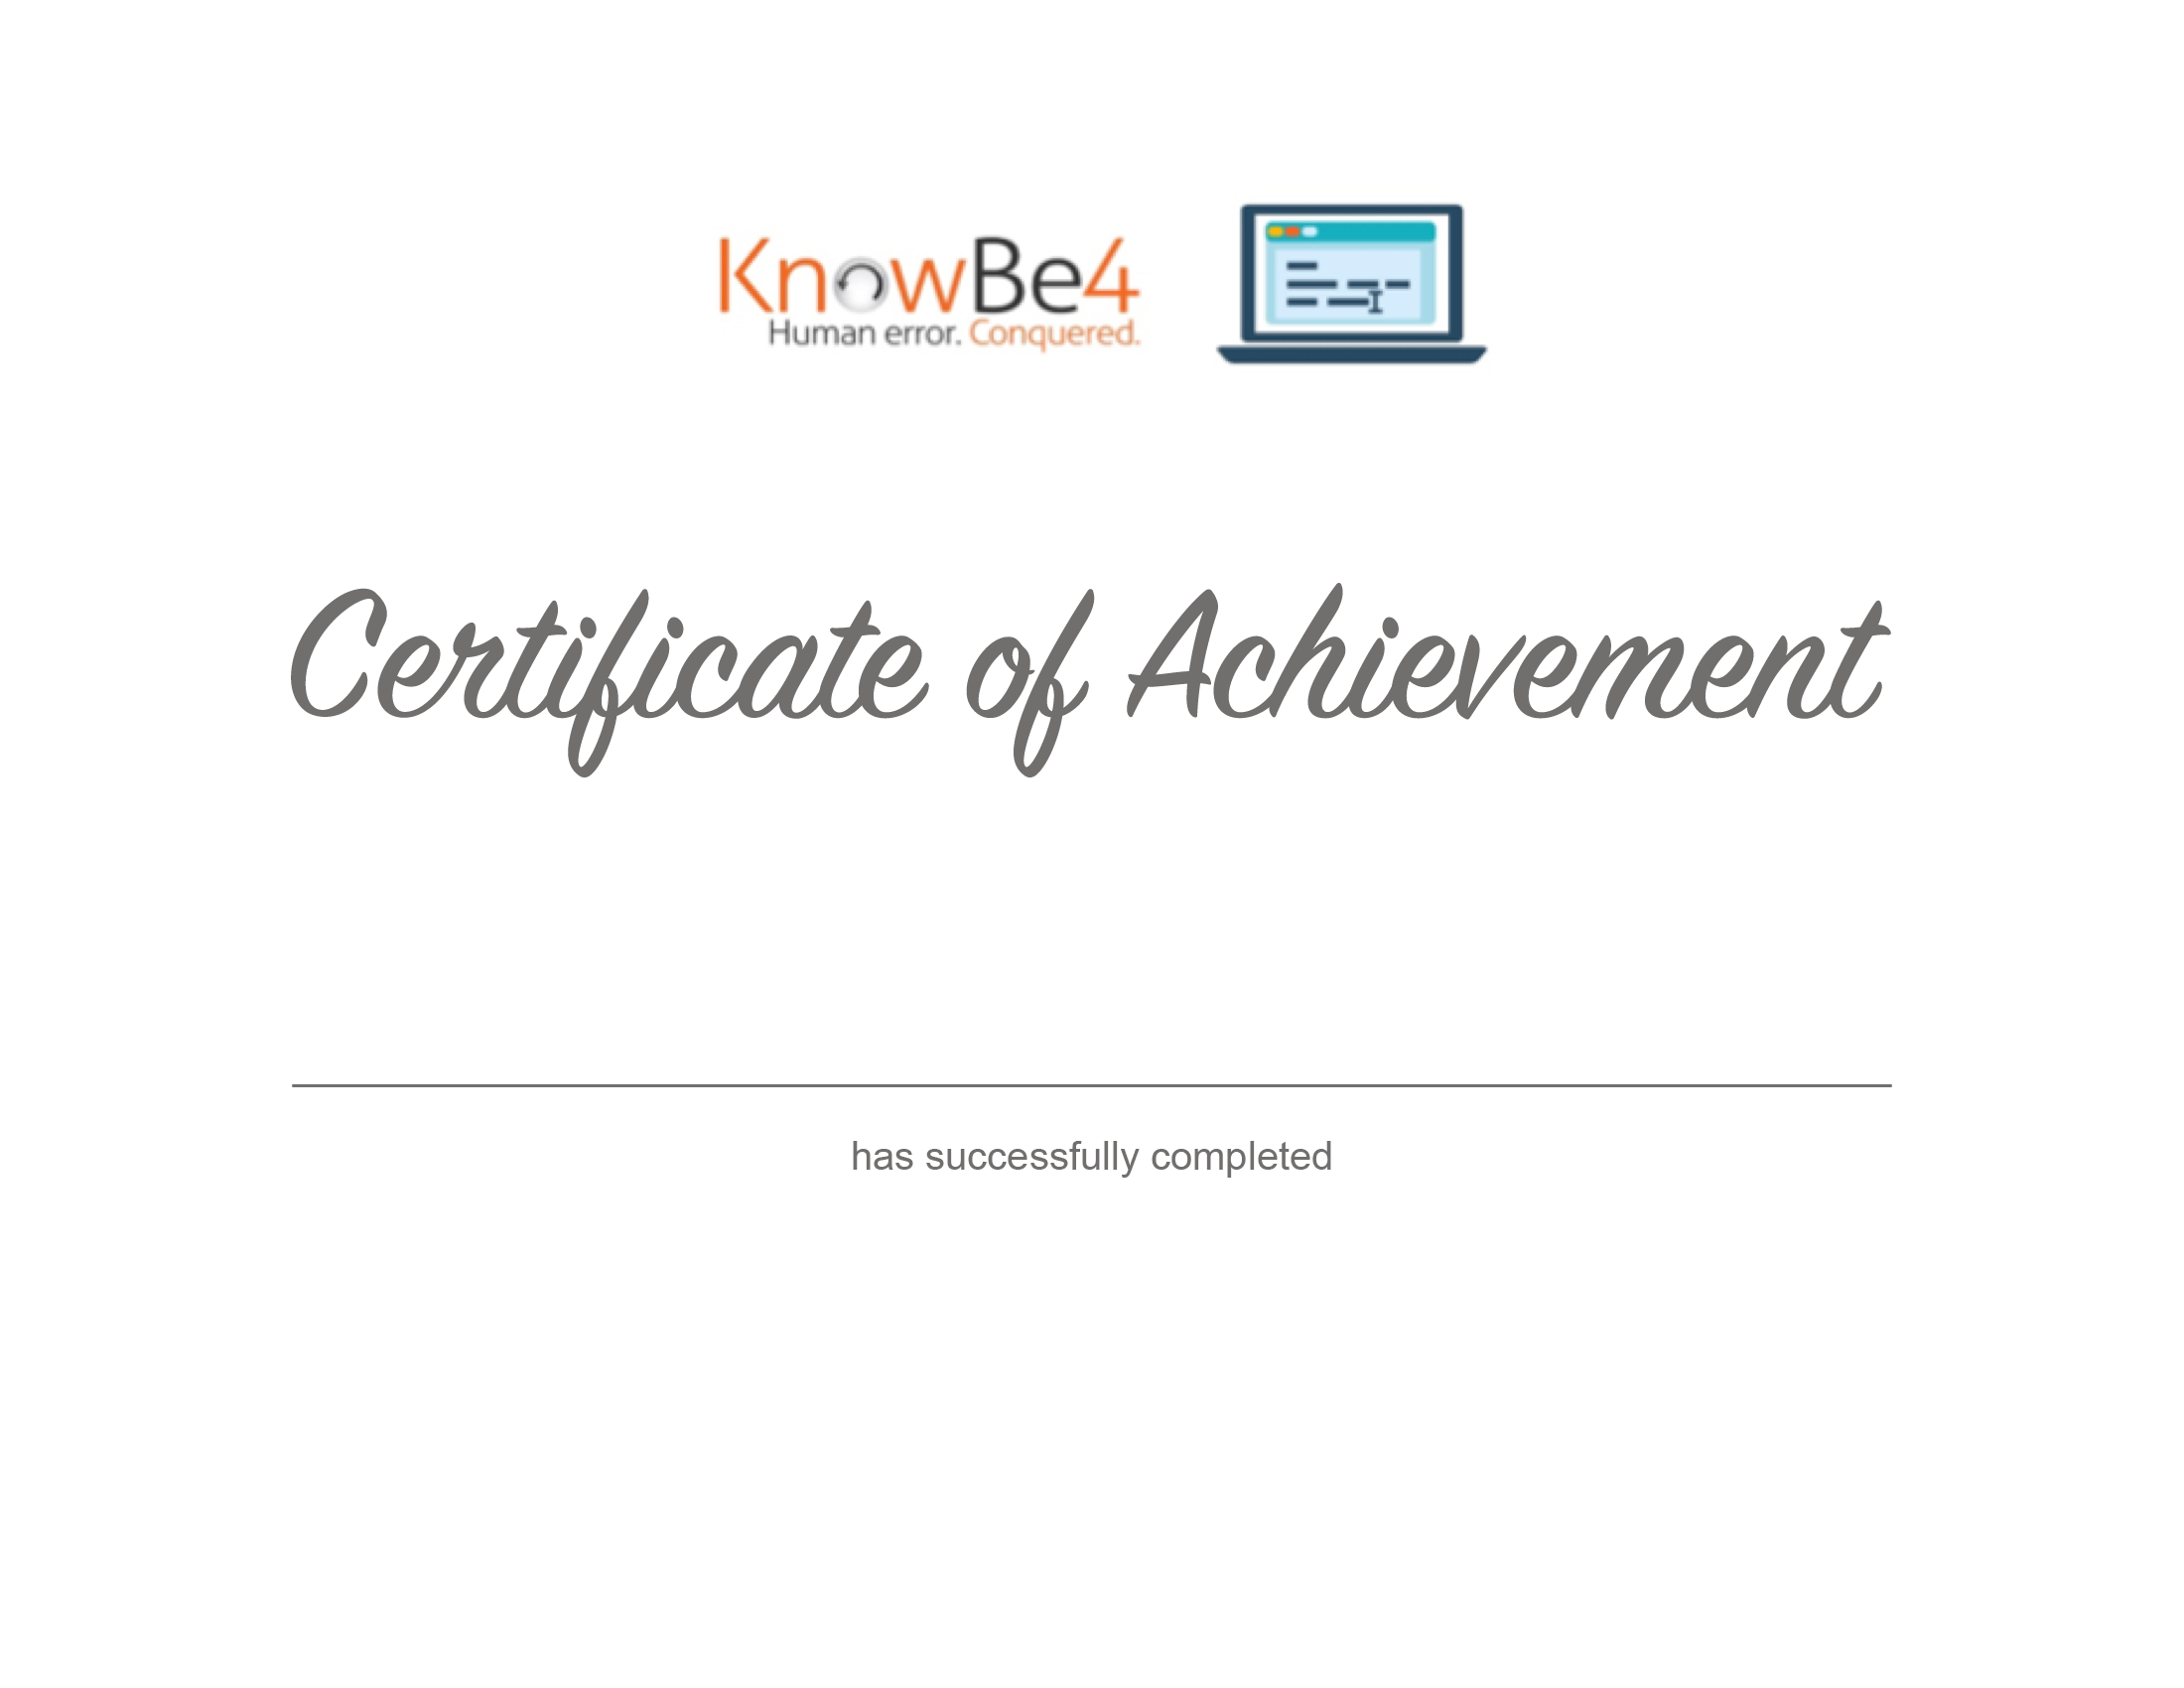 How Do I Customize My Users' Training Certificates Pertaining To No Certificate Templates Could Be Found